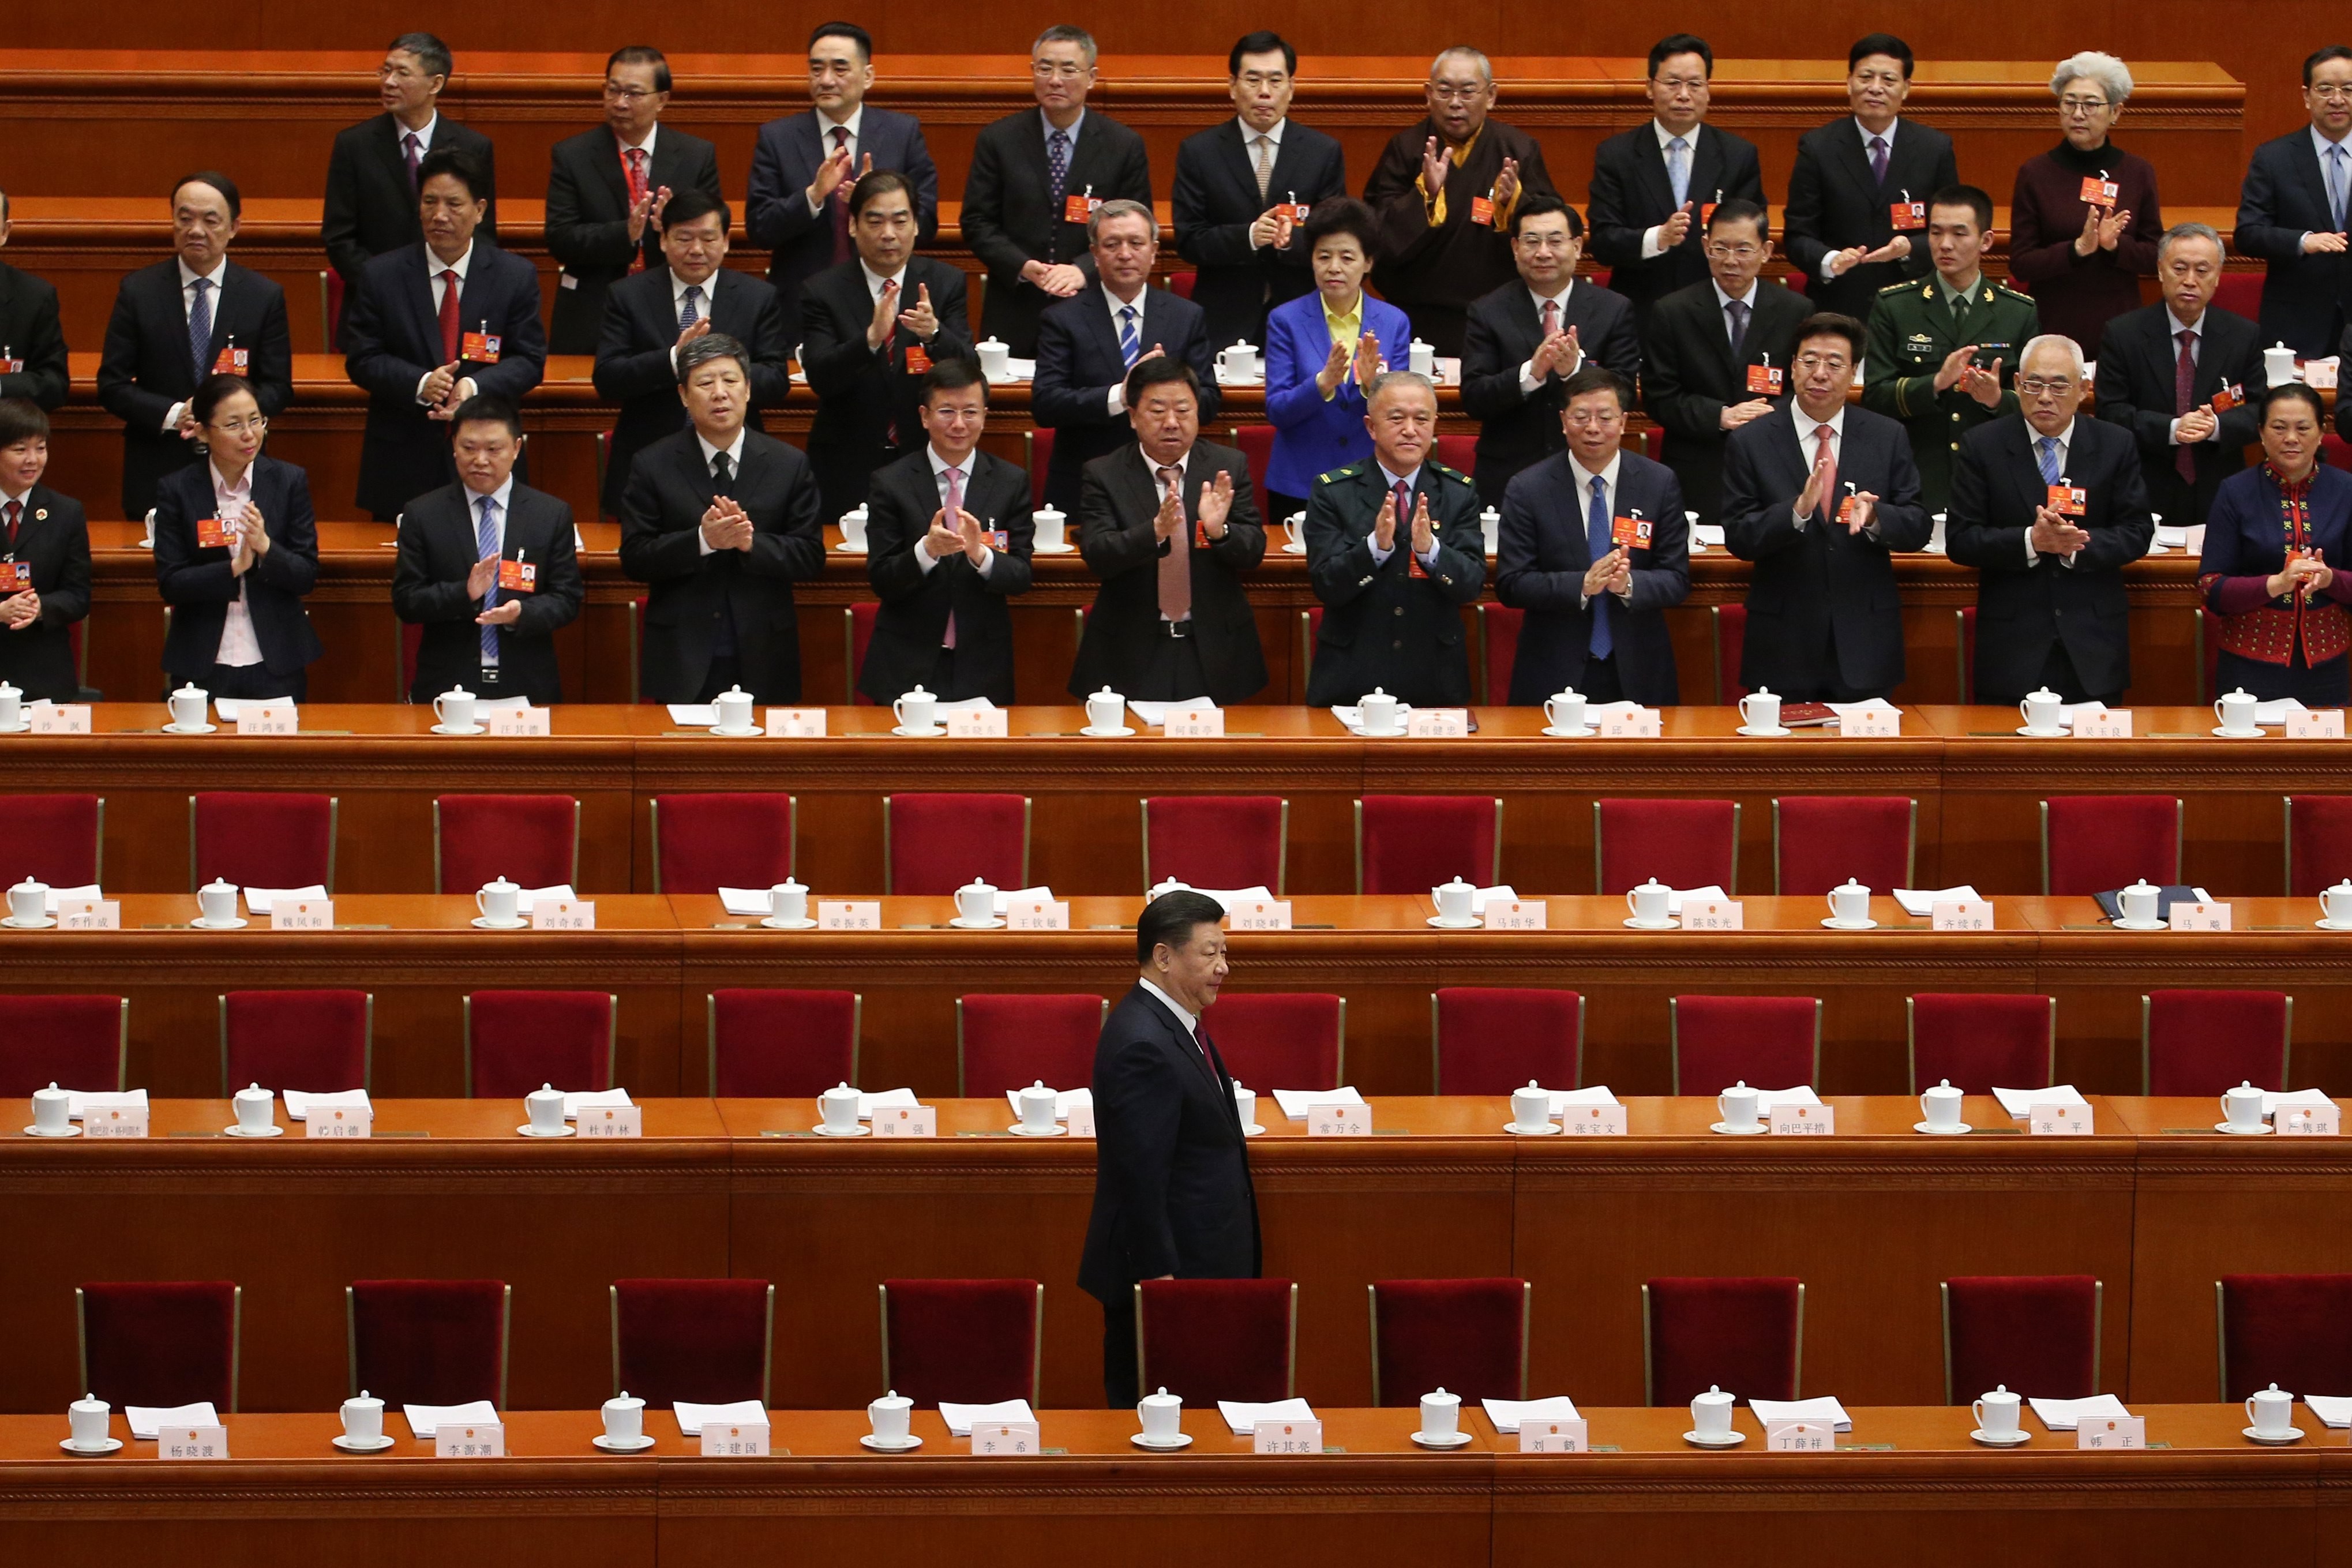 President Xi Jinping arrives for the opening of the first session of the National People’s Congress on Monday. Photo: EPA-EFE